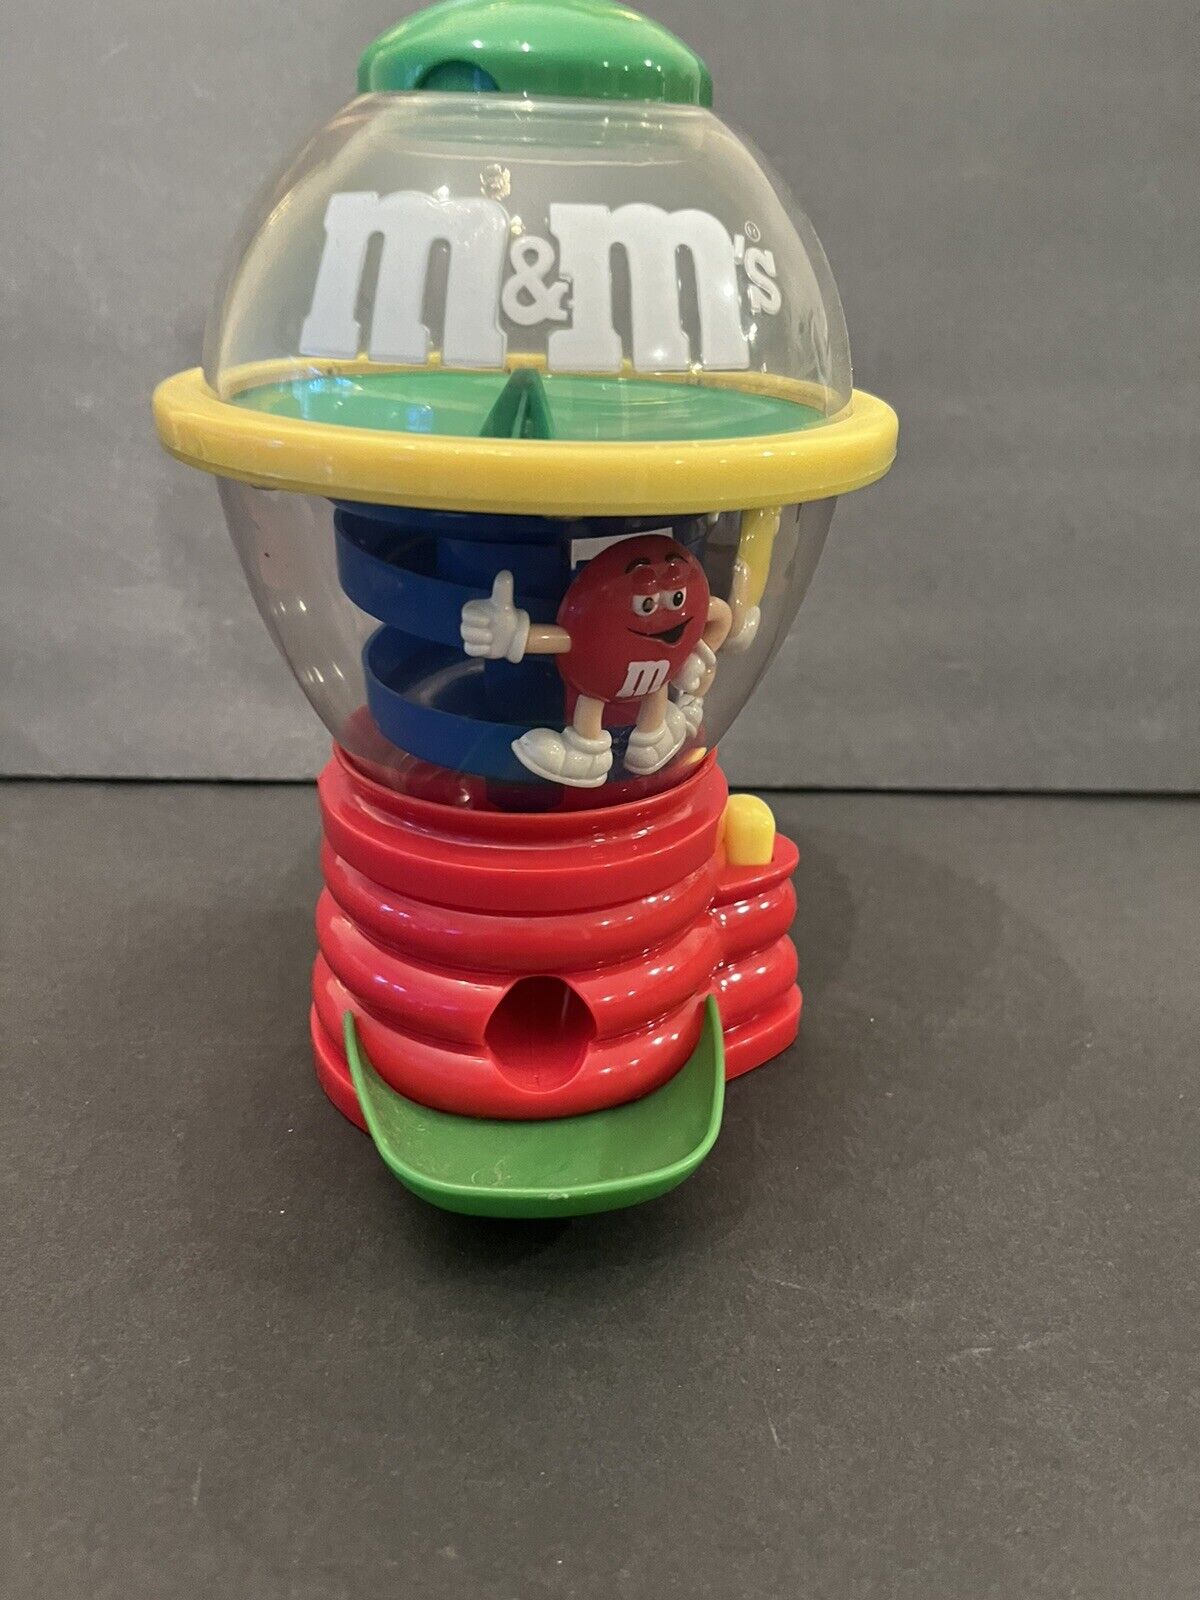 Rare Vintage 1990’s M&M’s Spinning Candy Dispenser Plastic Pre Owned & Works